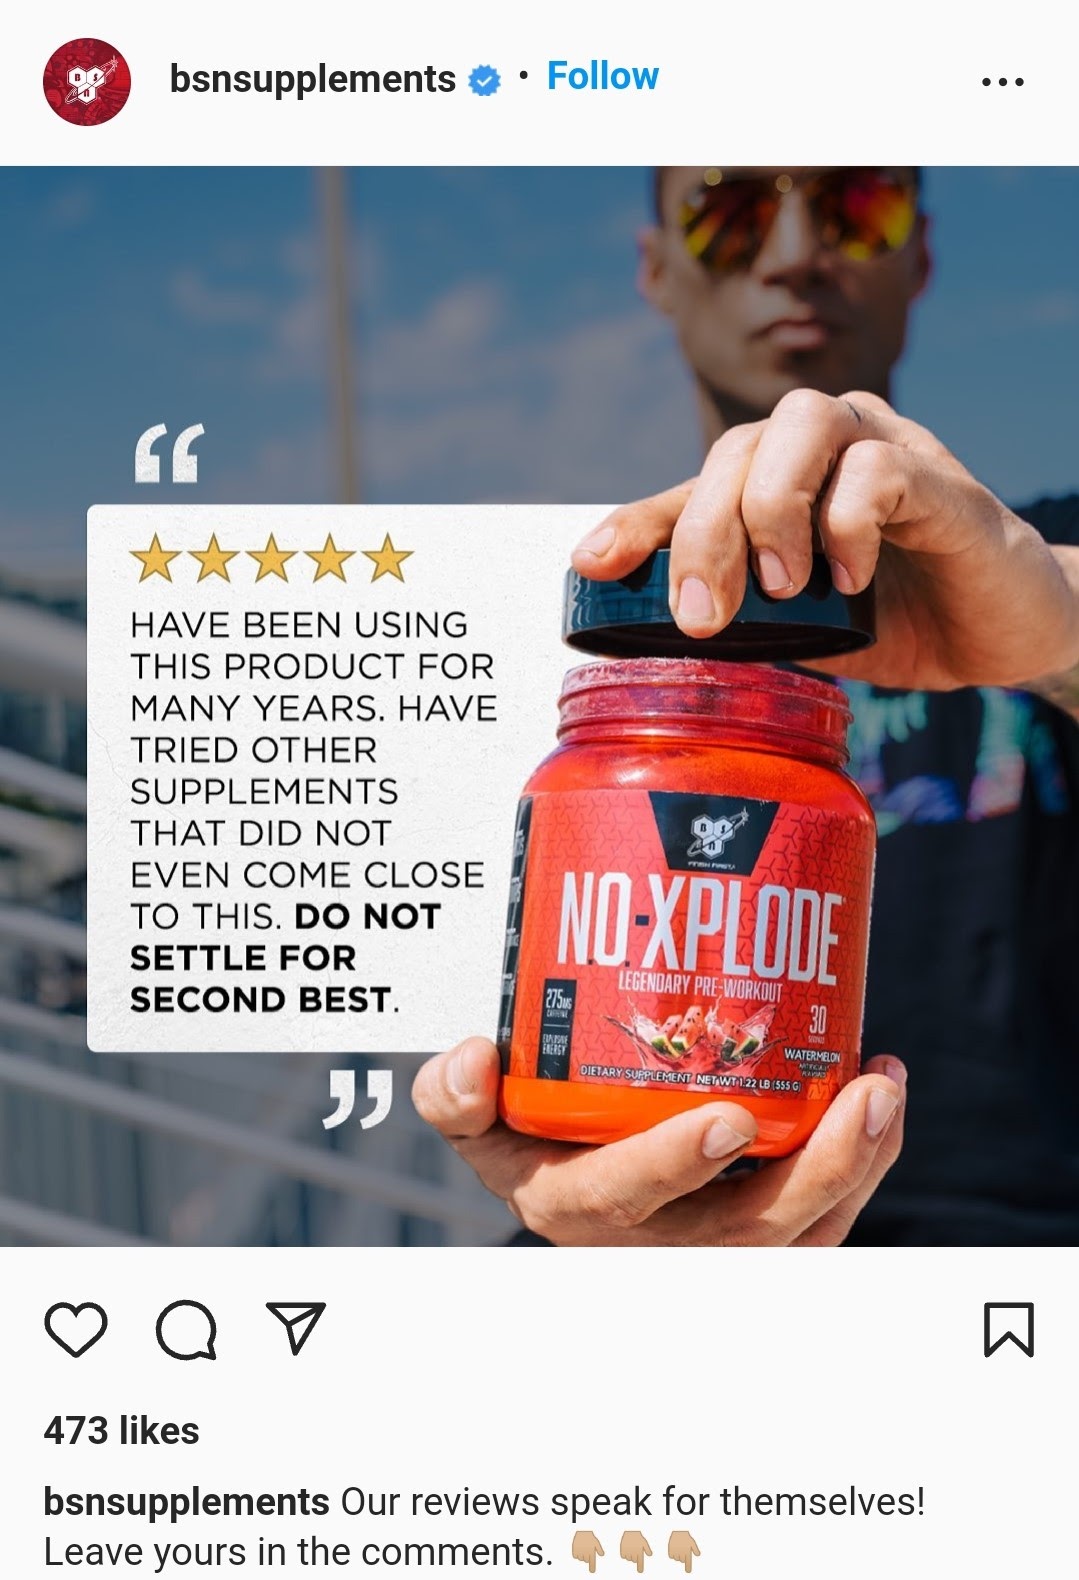 Image from BSN's Instagram where they share a customer review